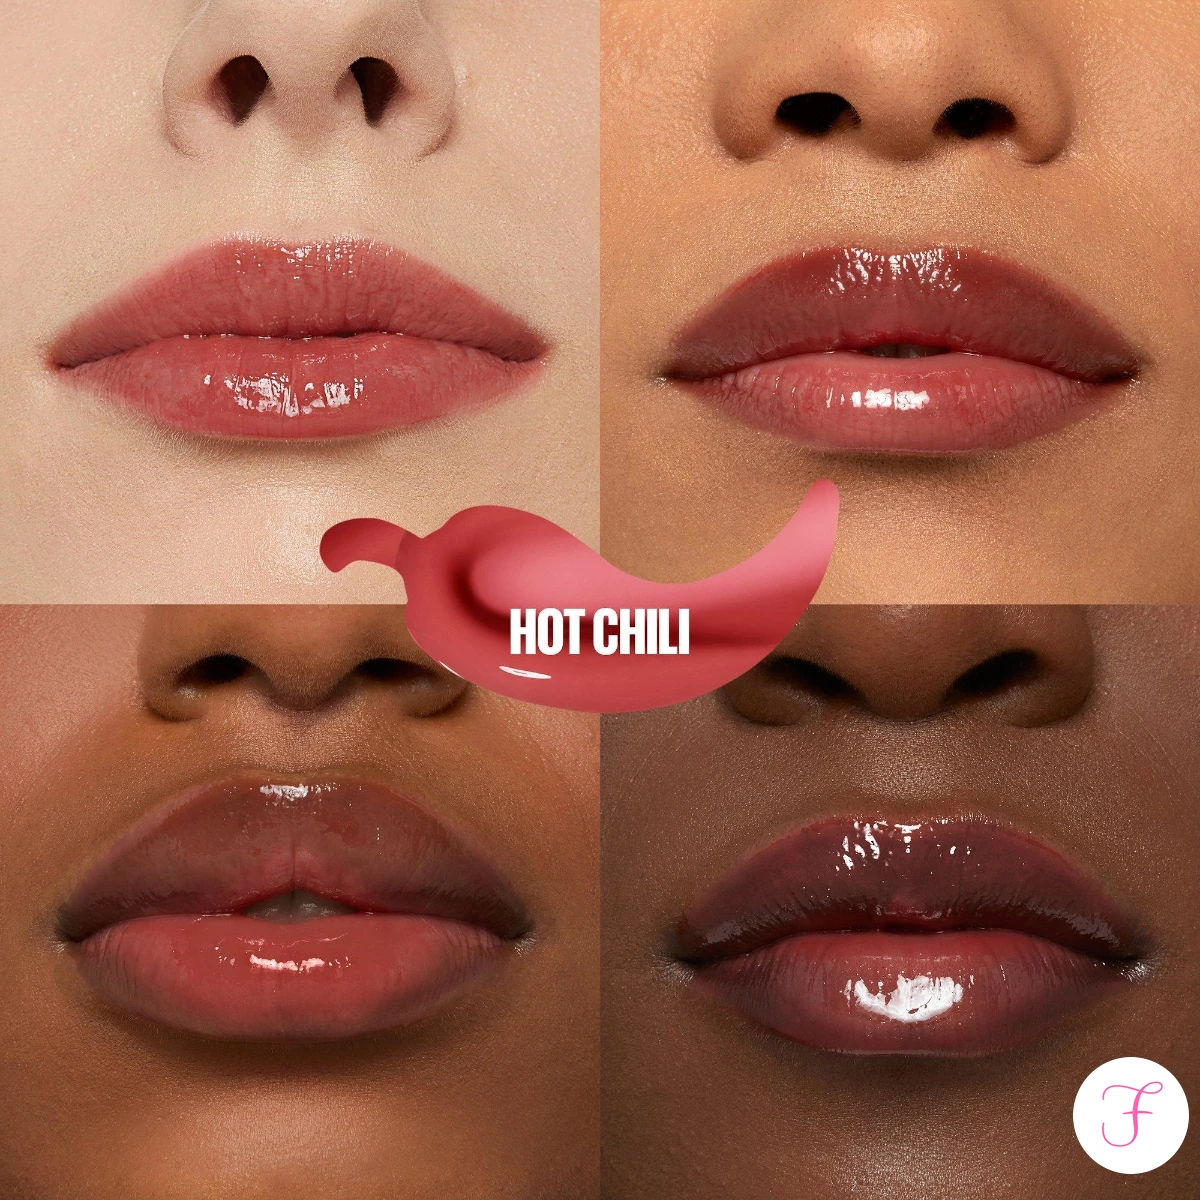 maybelline-Lifter-Plump-hot-chili-swatches